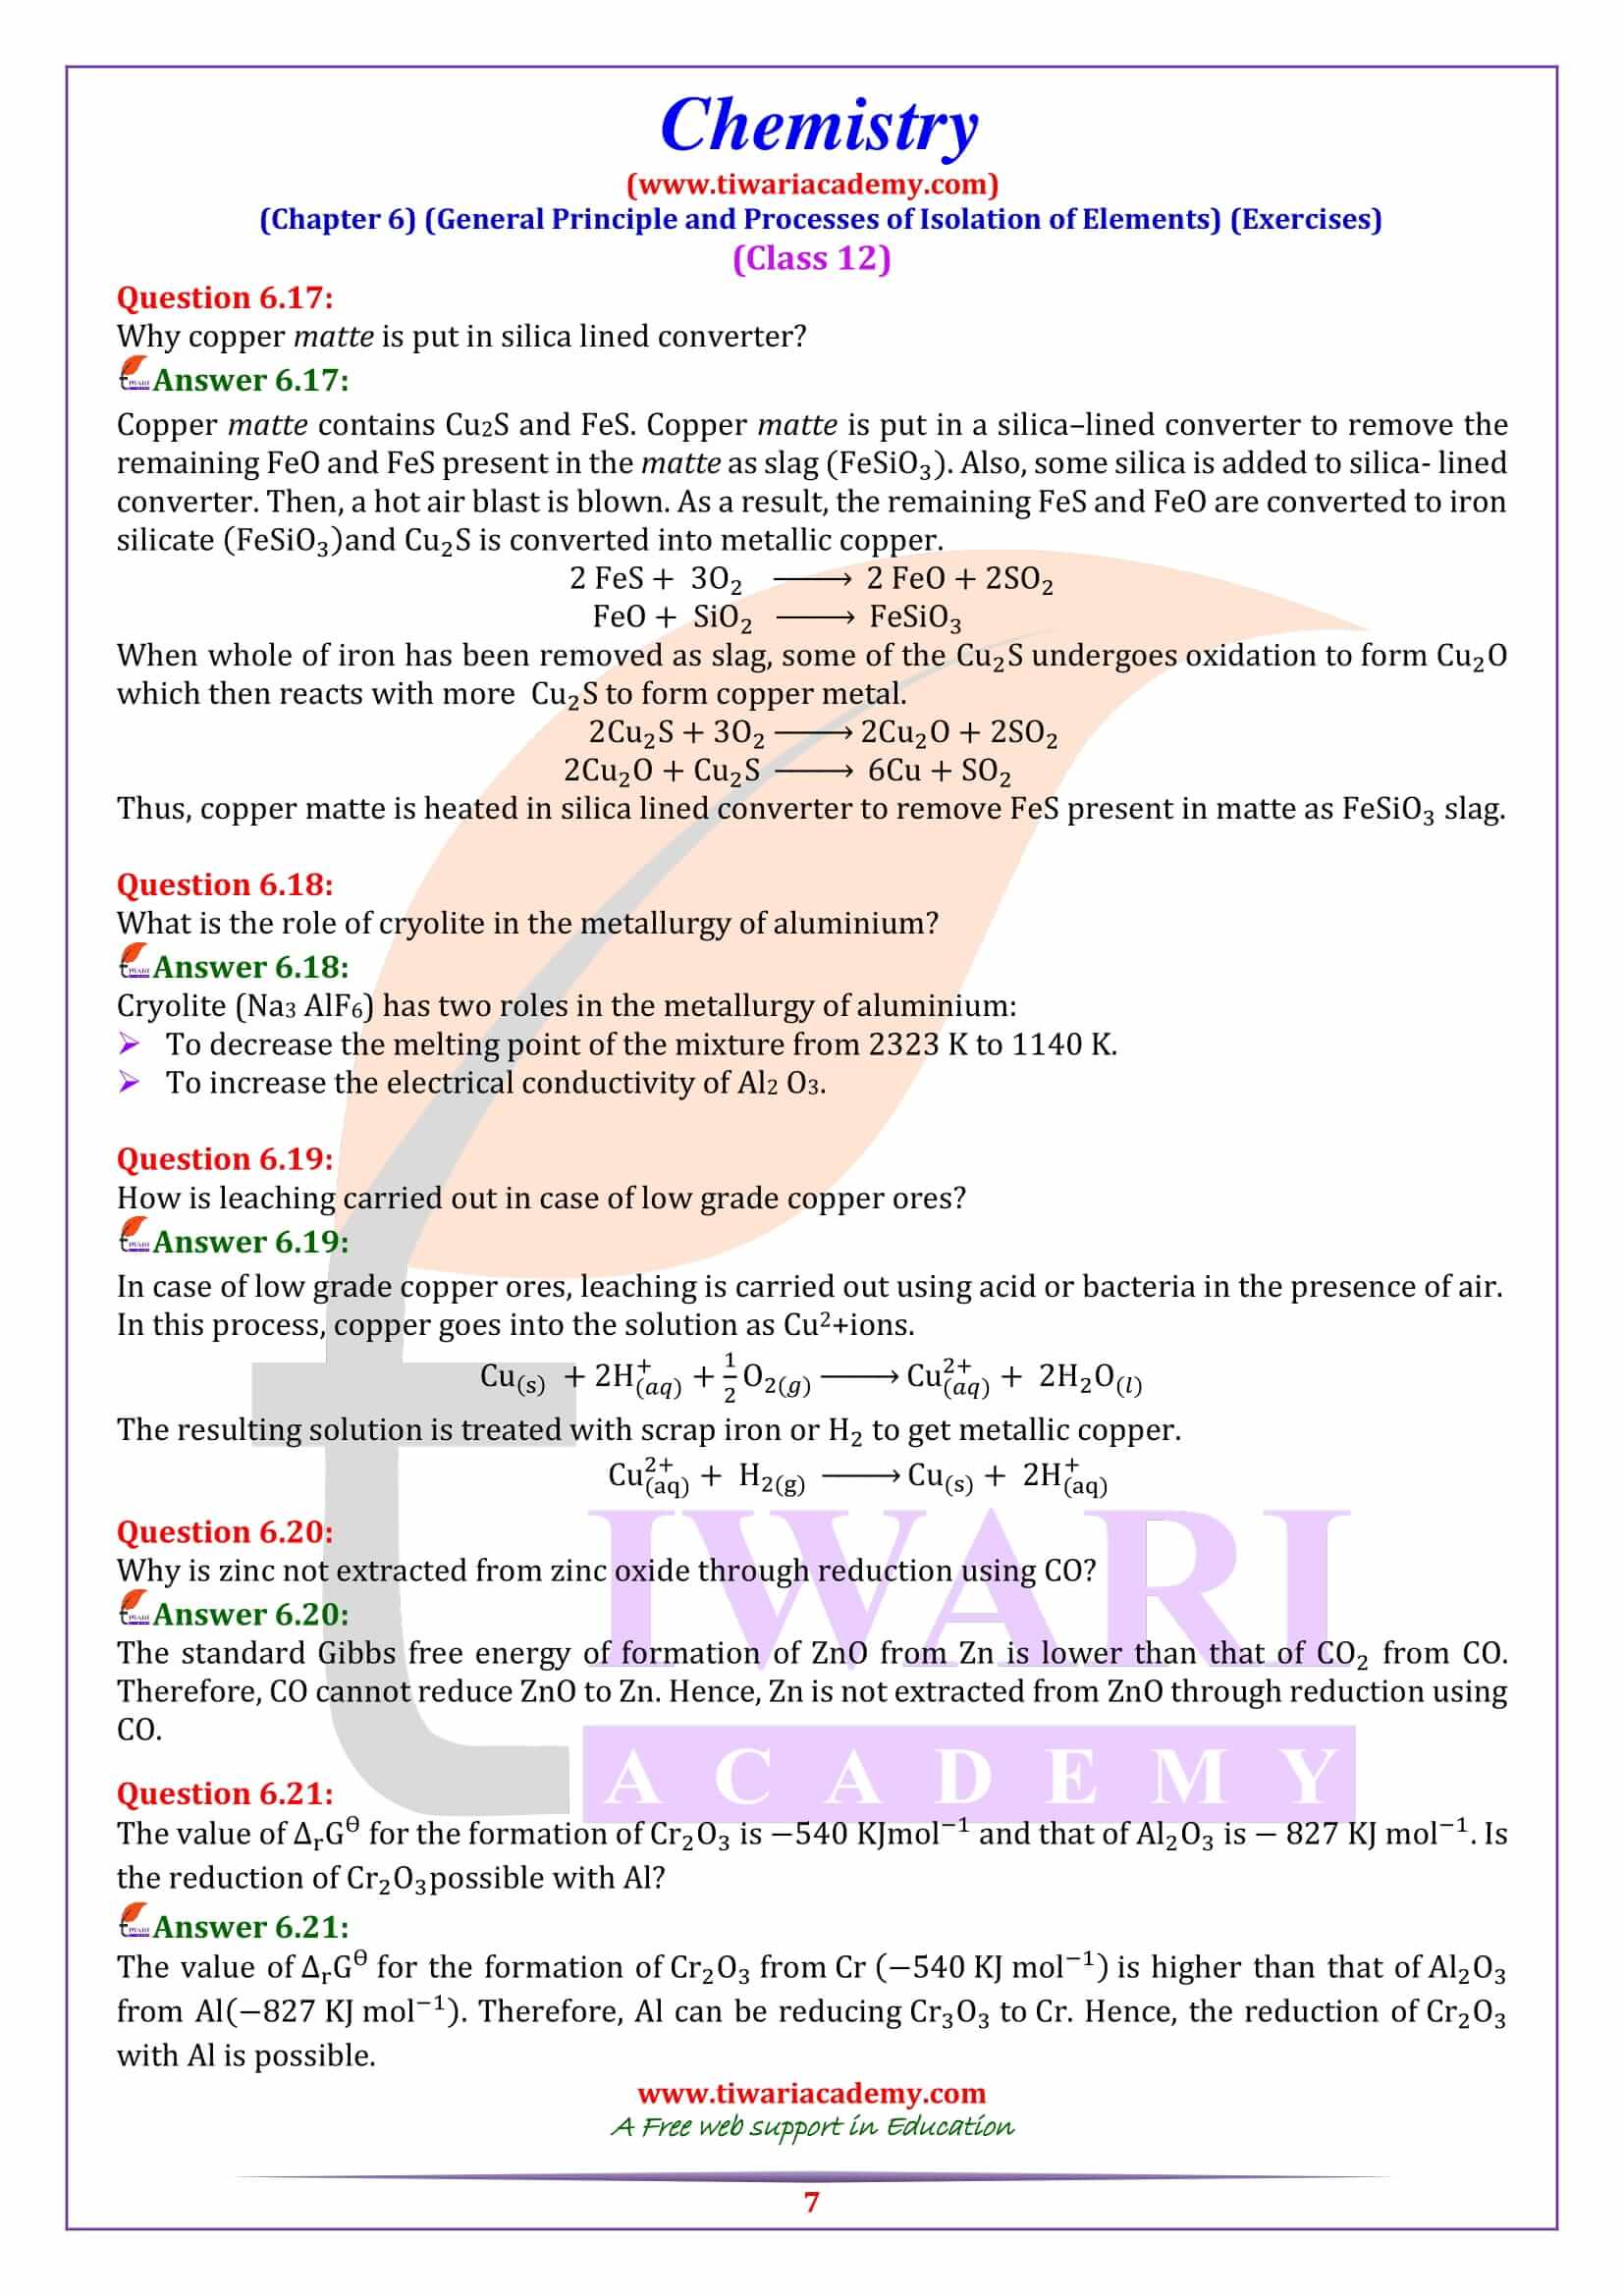 NCERT Solutions for Class 12 Chemistry Chapter 6 guide